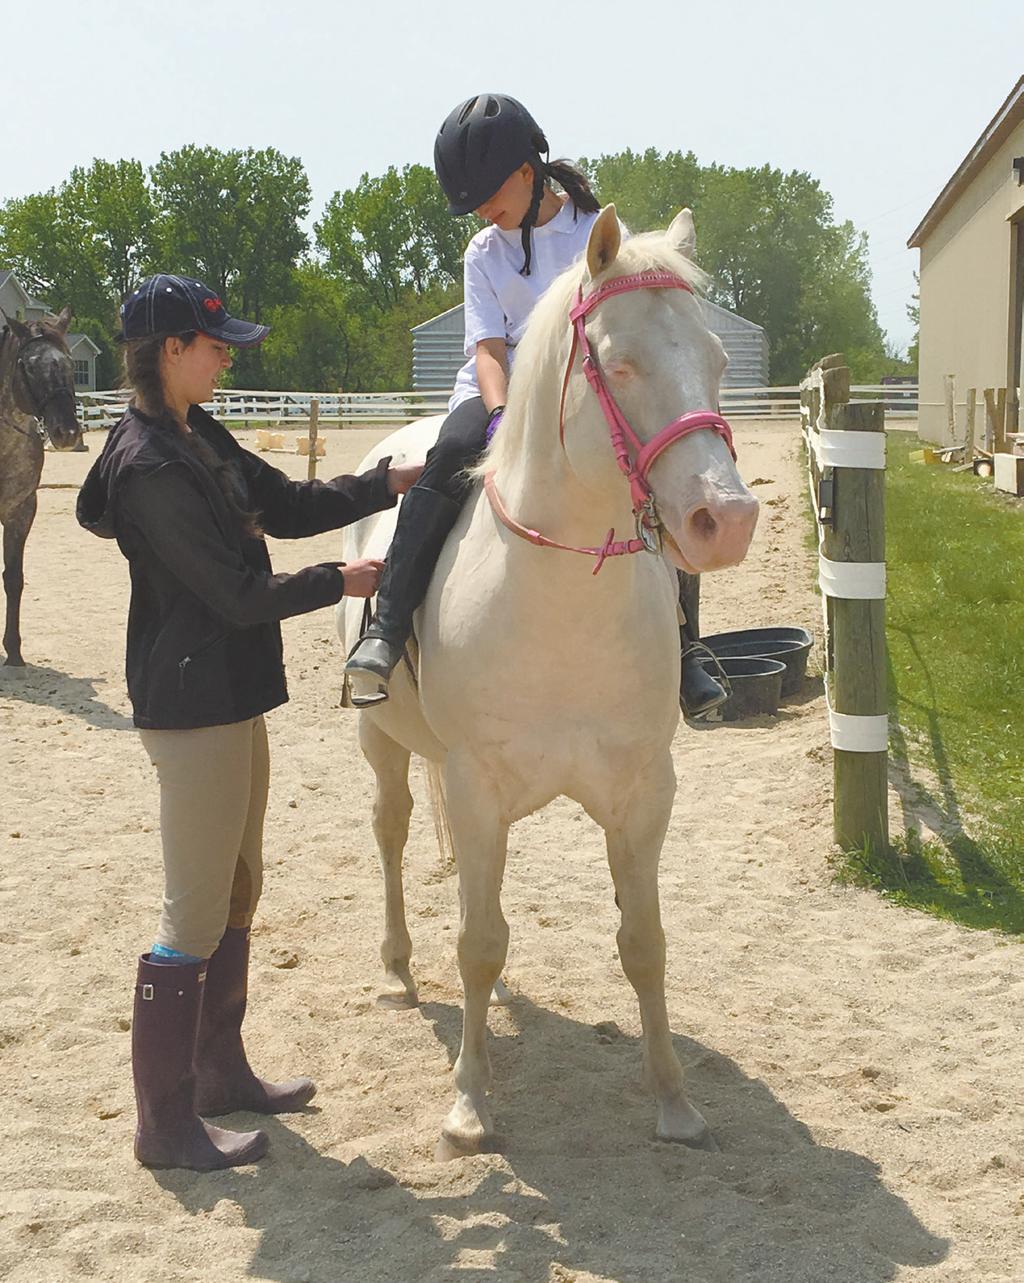 NORMANTON EQUESTRIAN CENTER Beginner Group Lessons Looking to save a few dollars? en sign up for our beginner group lessons.